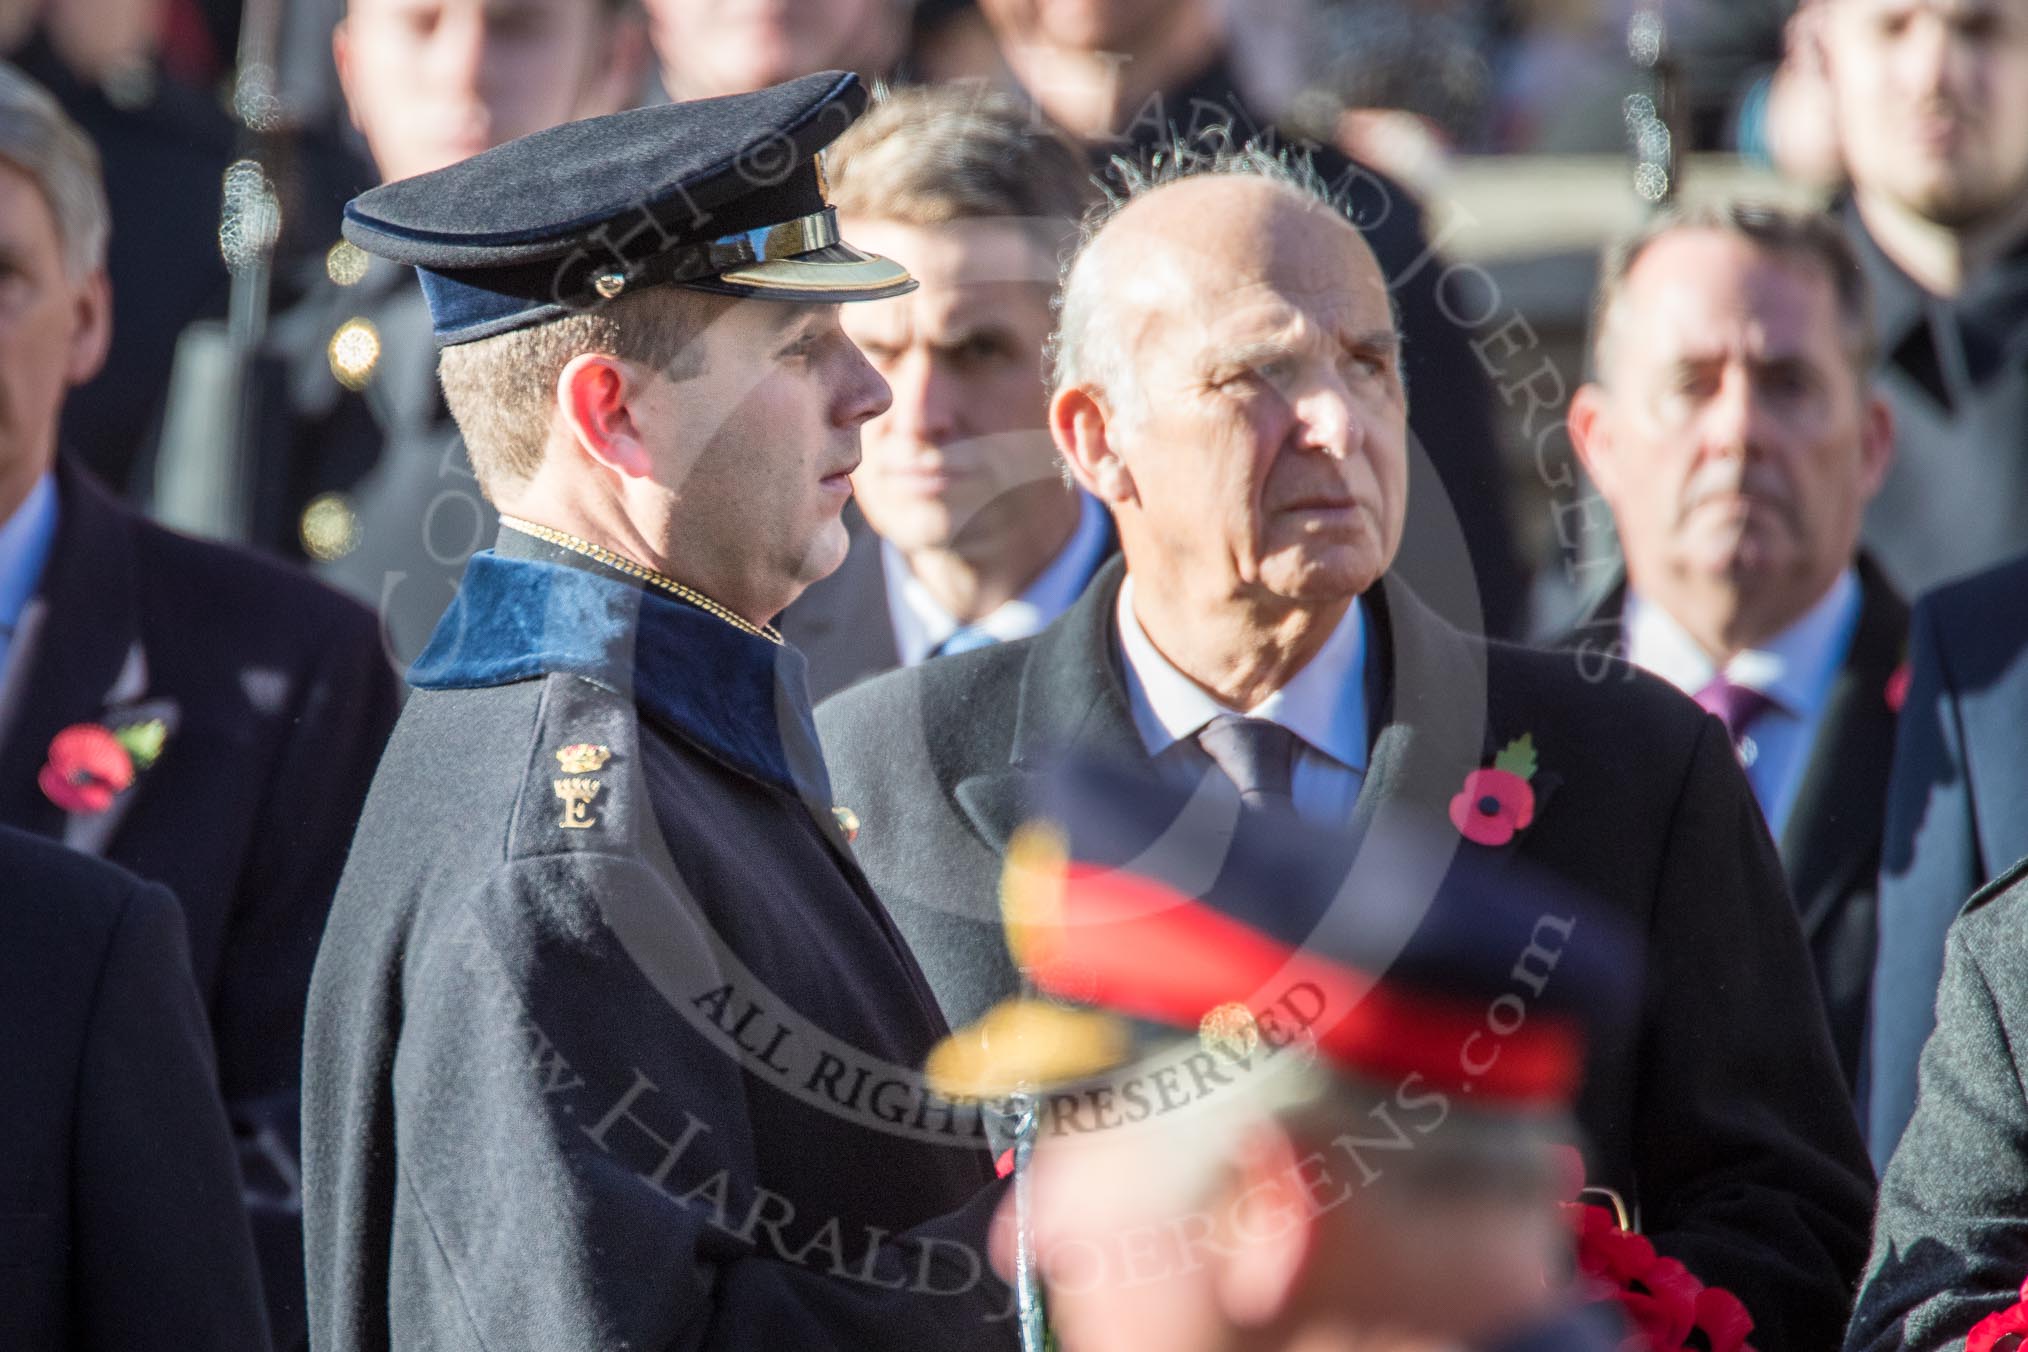 Major Gareth Williams, Royal Wessex Yeomanry, Equerry to The Earl of Wessex, during Remembrance Sunday Cenotaph Ceremony 2018 at Horse Guards Parade, Westminster, London, 11 November 2018, 10:59.